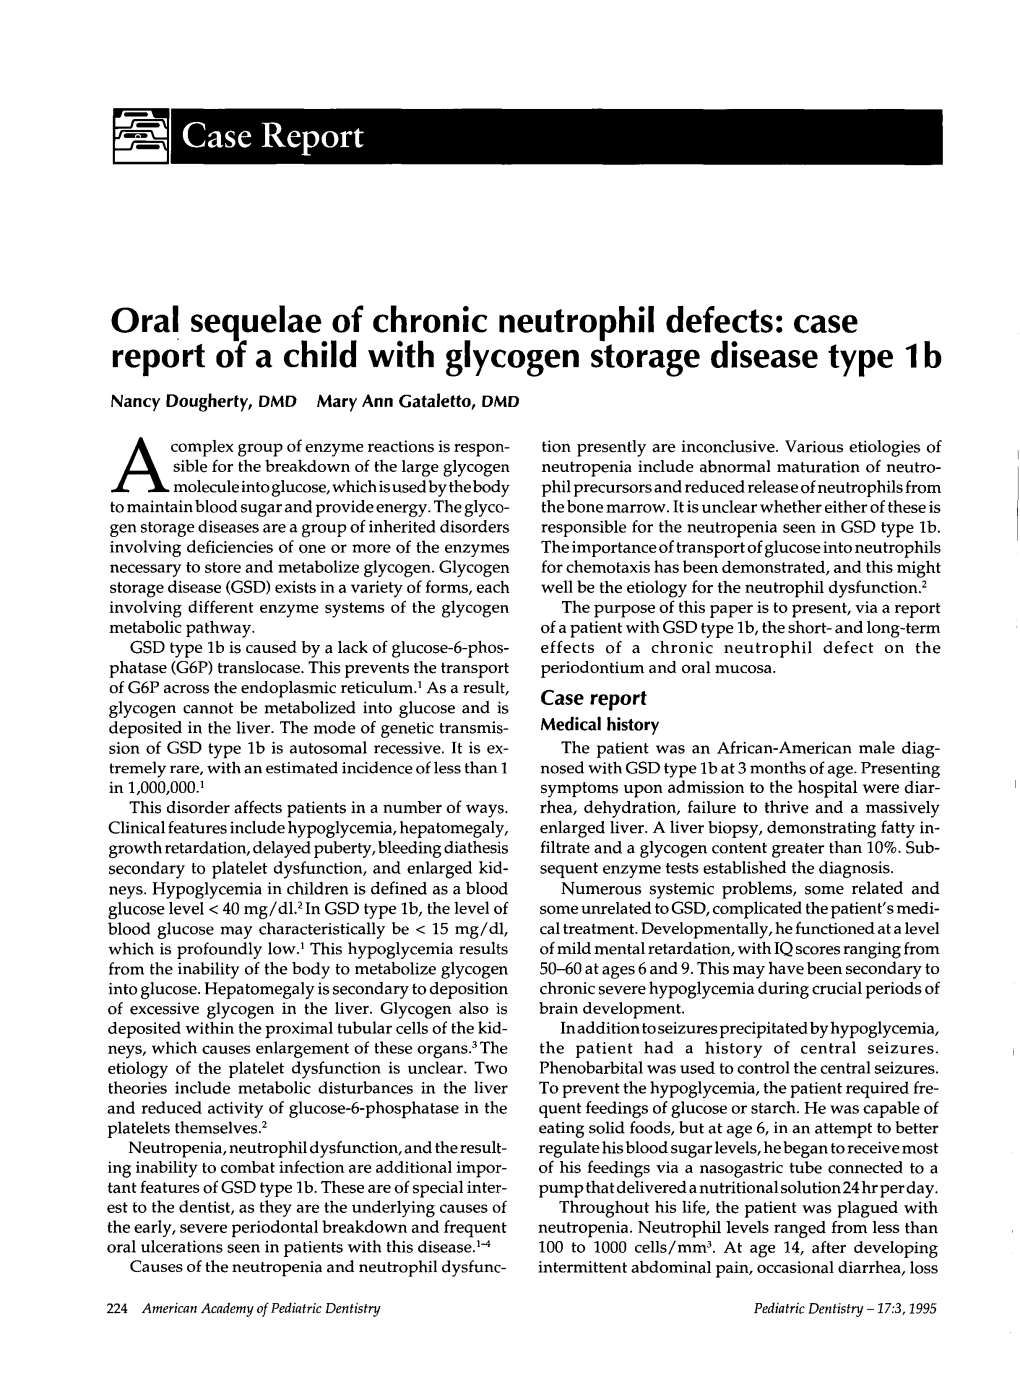 Oral Sequelae of Chronic Neutrophil Defects: Case Report of A